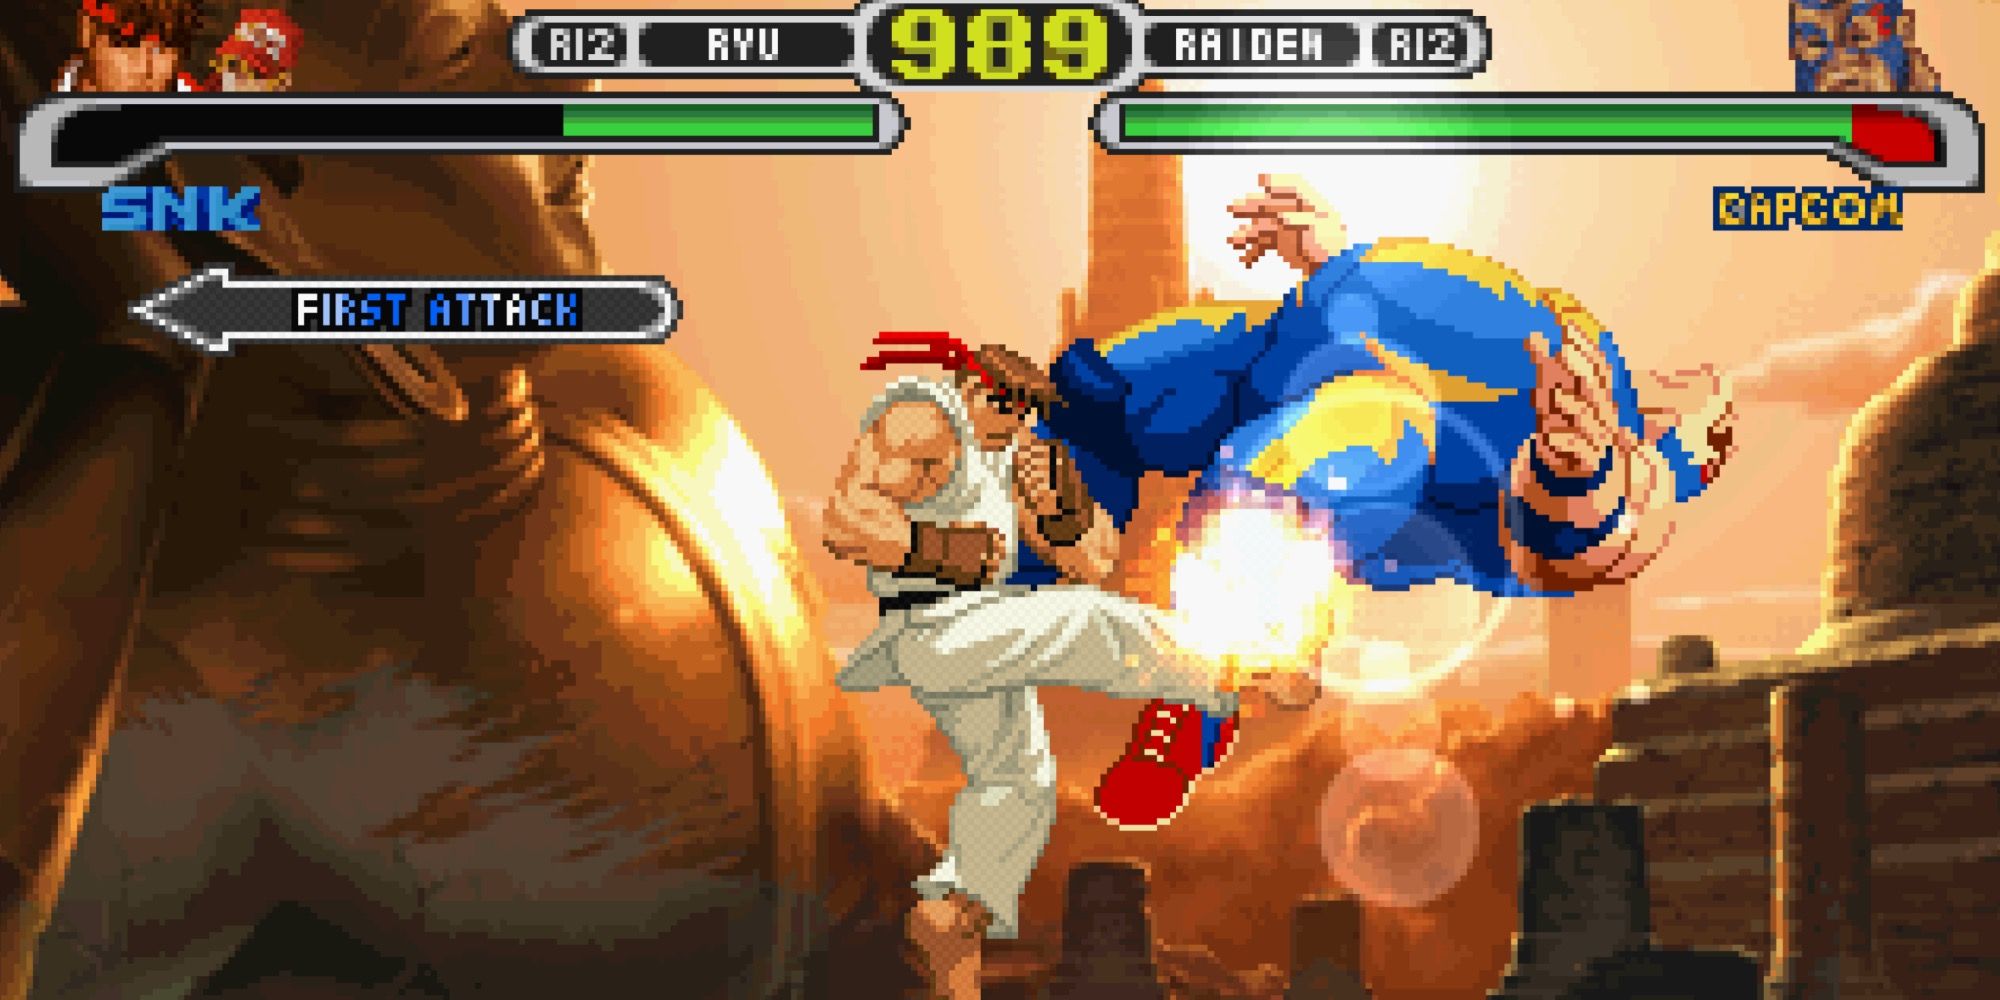 Playing a match in Capcom VS SNK Pro